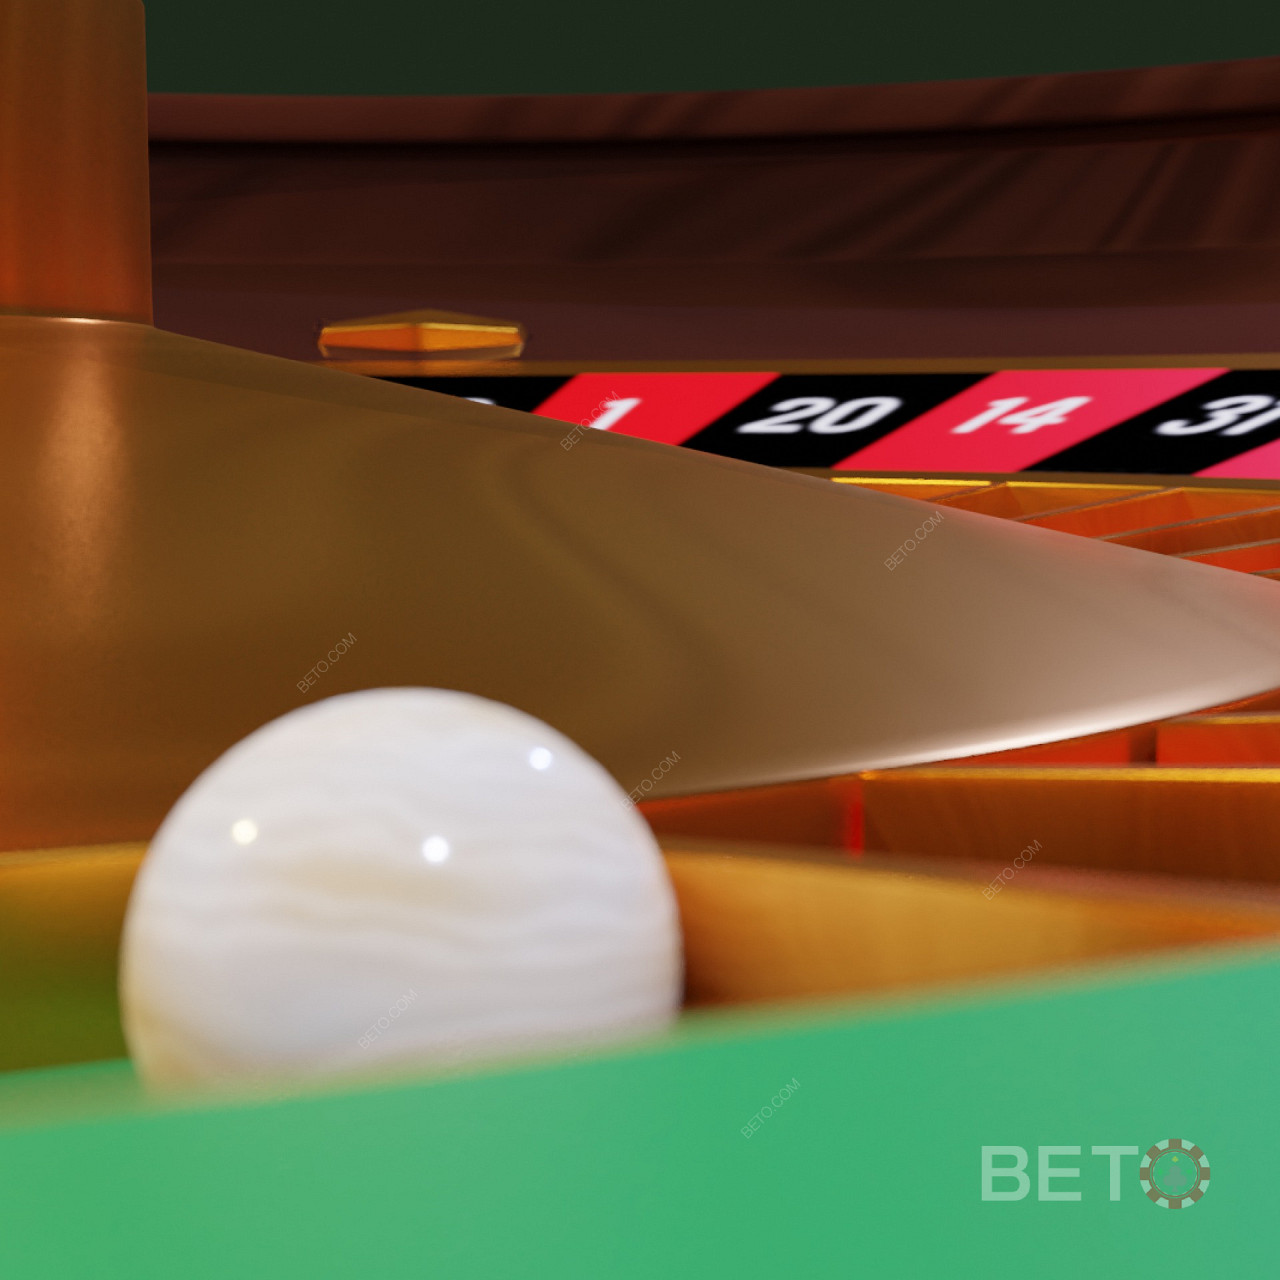 Roulette Ball - How it Impacts Your Live Casino Gameplay